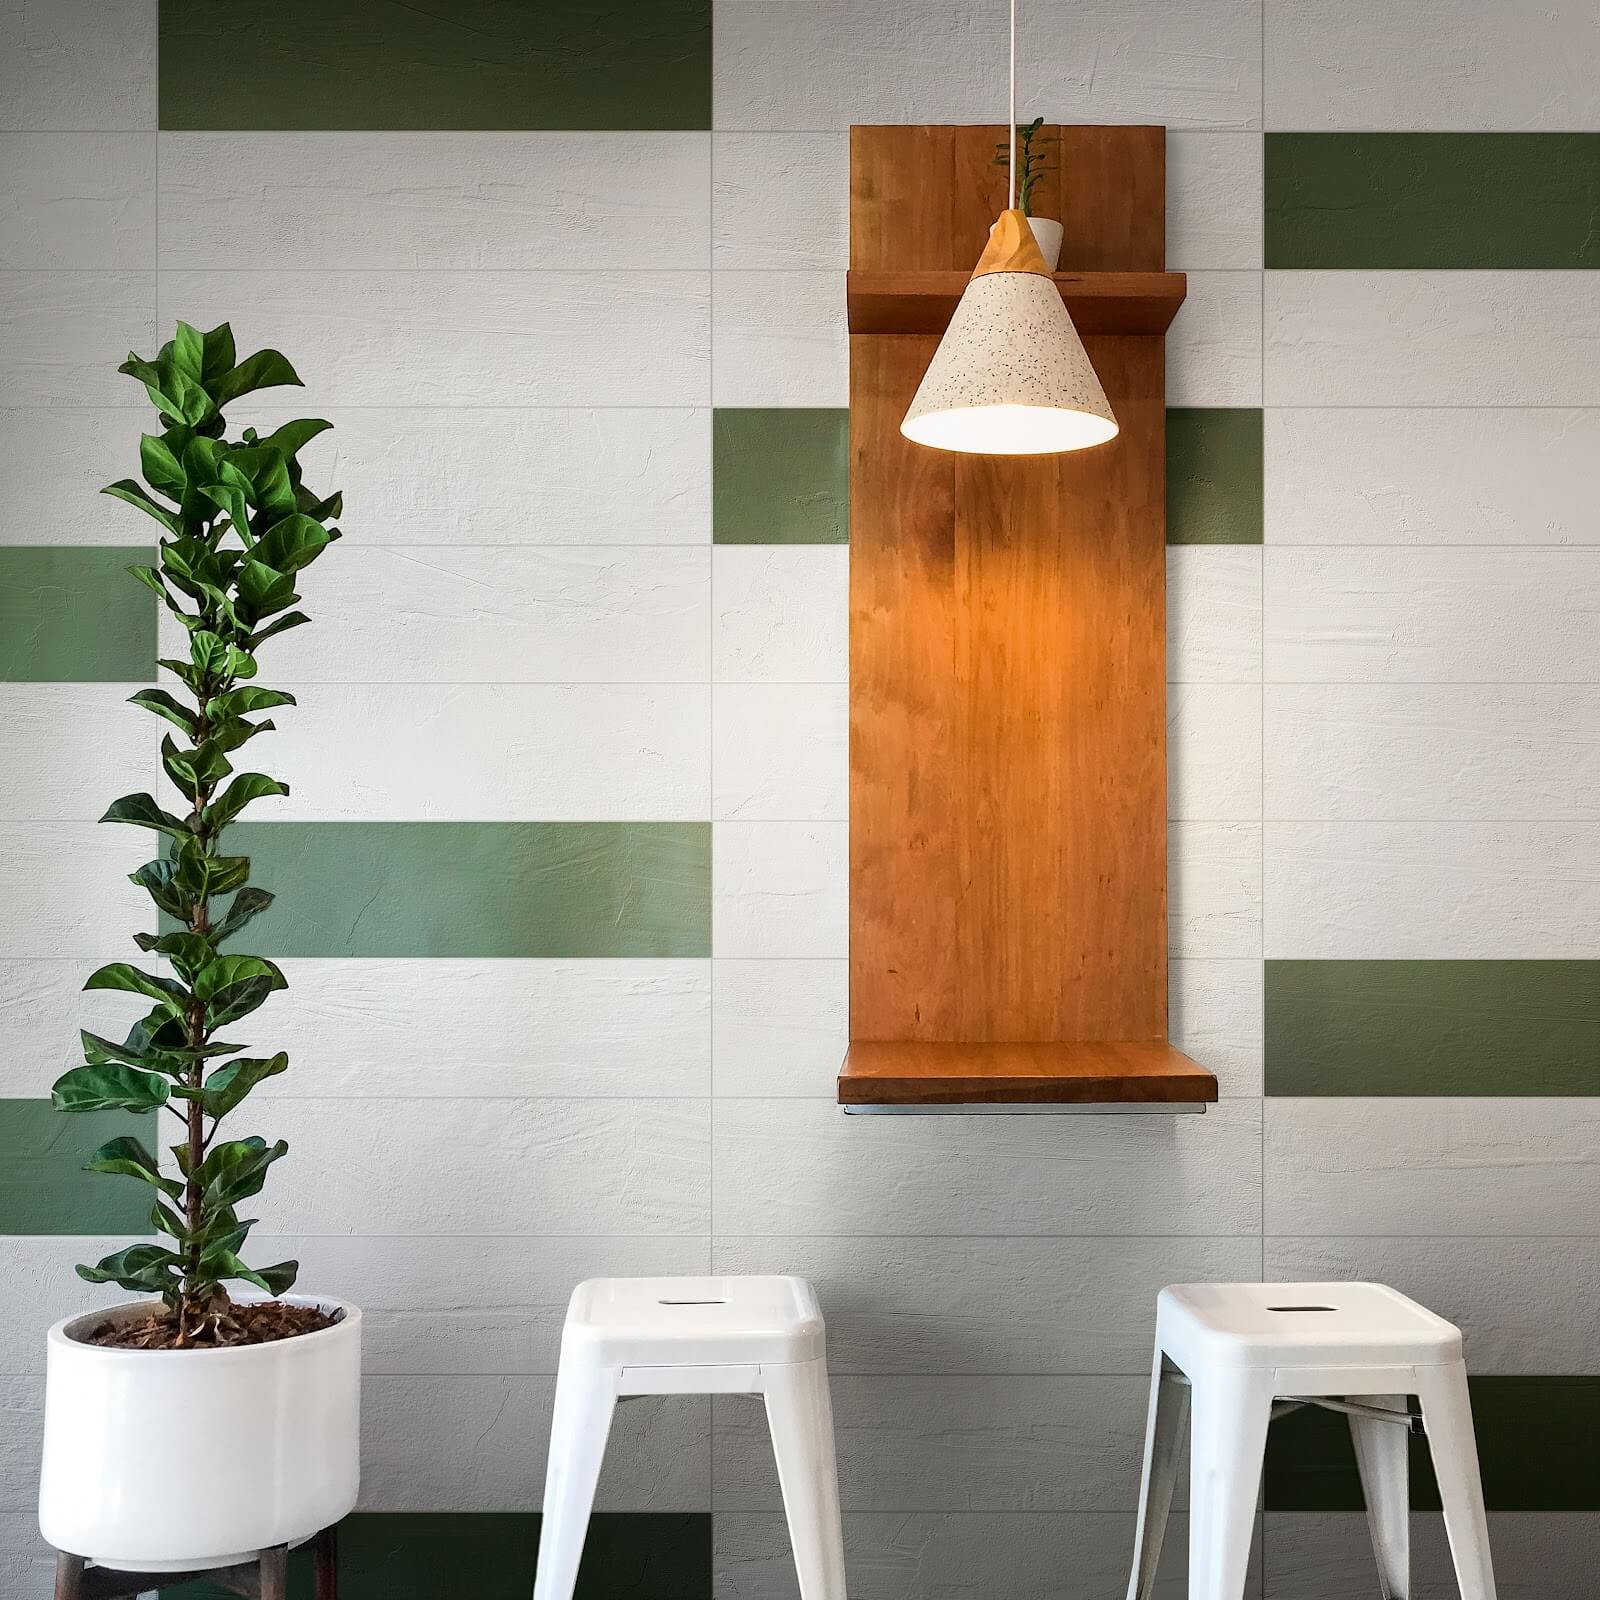 White and green plaster-look tile wall